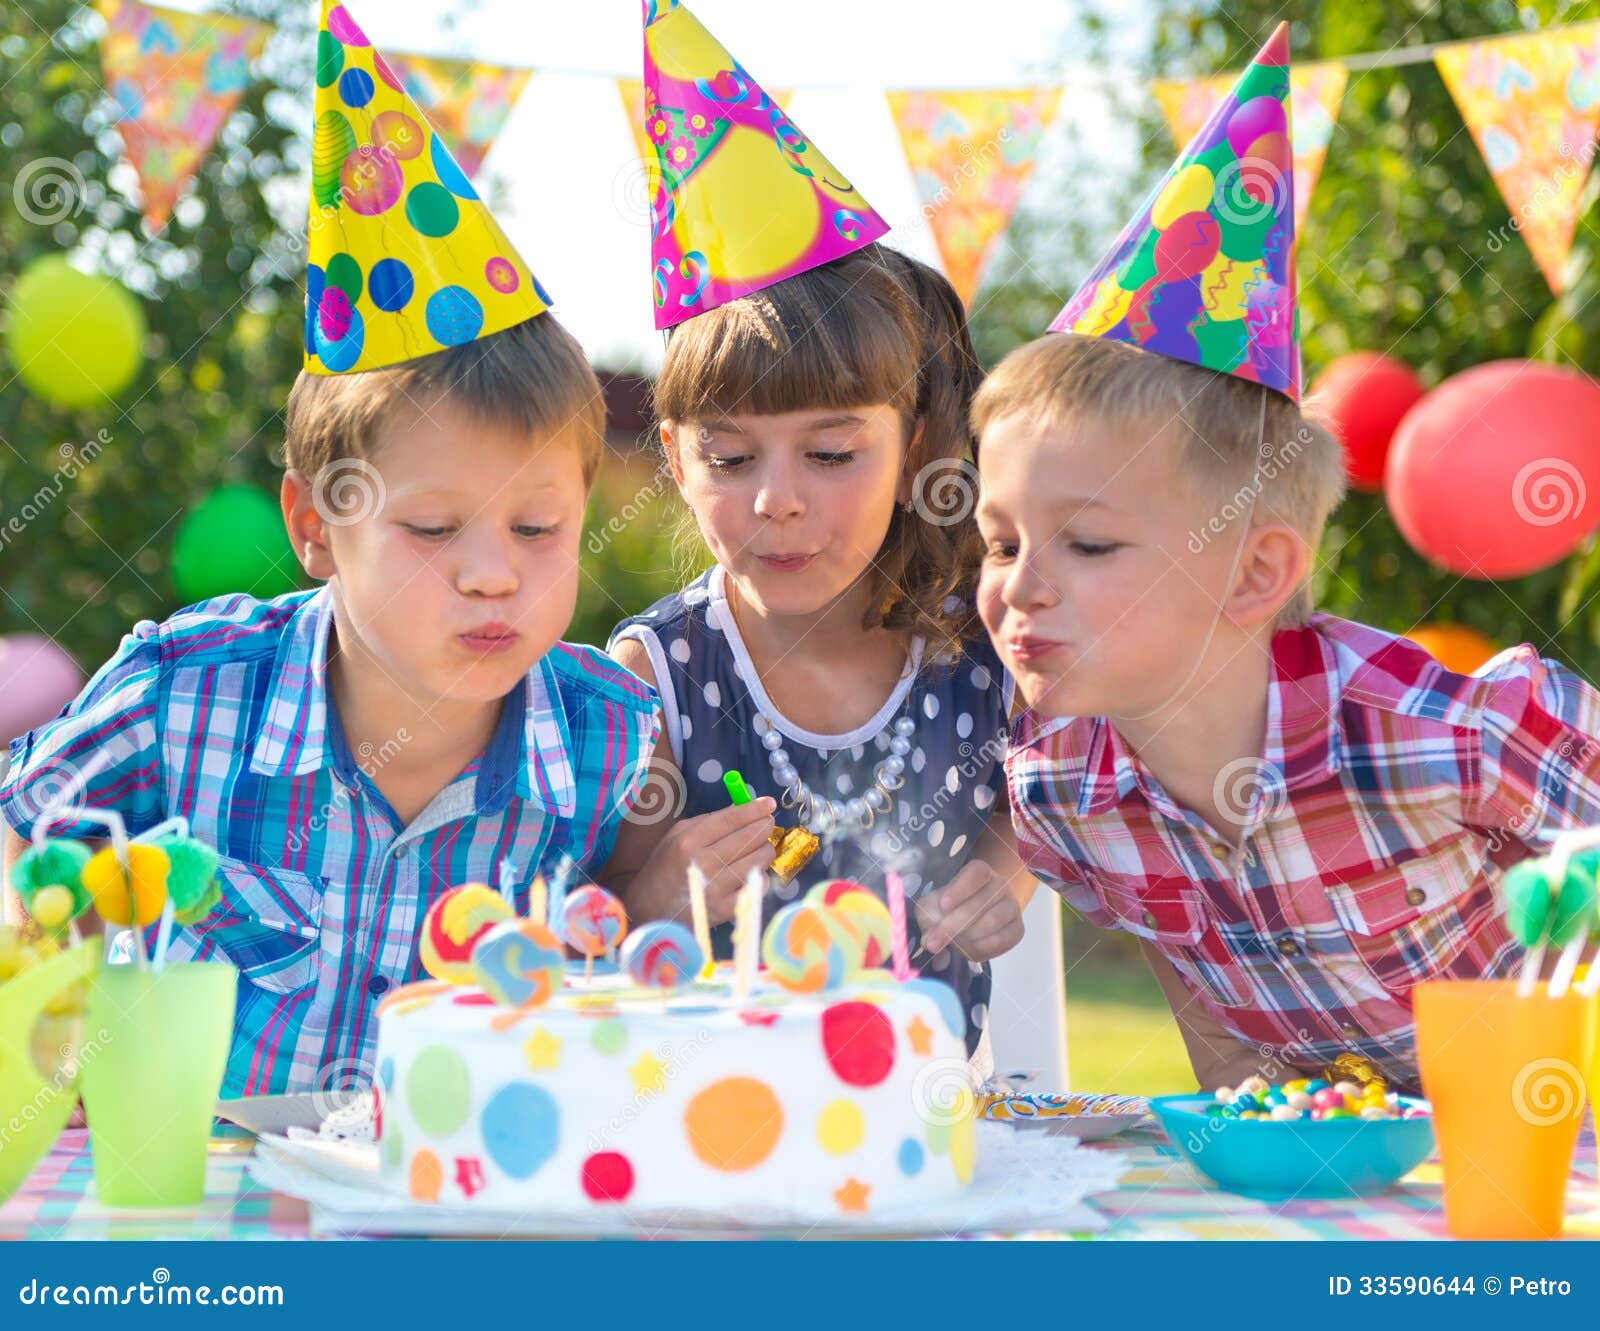 Kids at Birthday Party Blowing Candles on Cake Stock Photo - Image ...